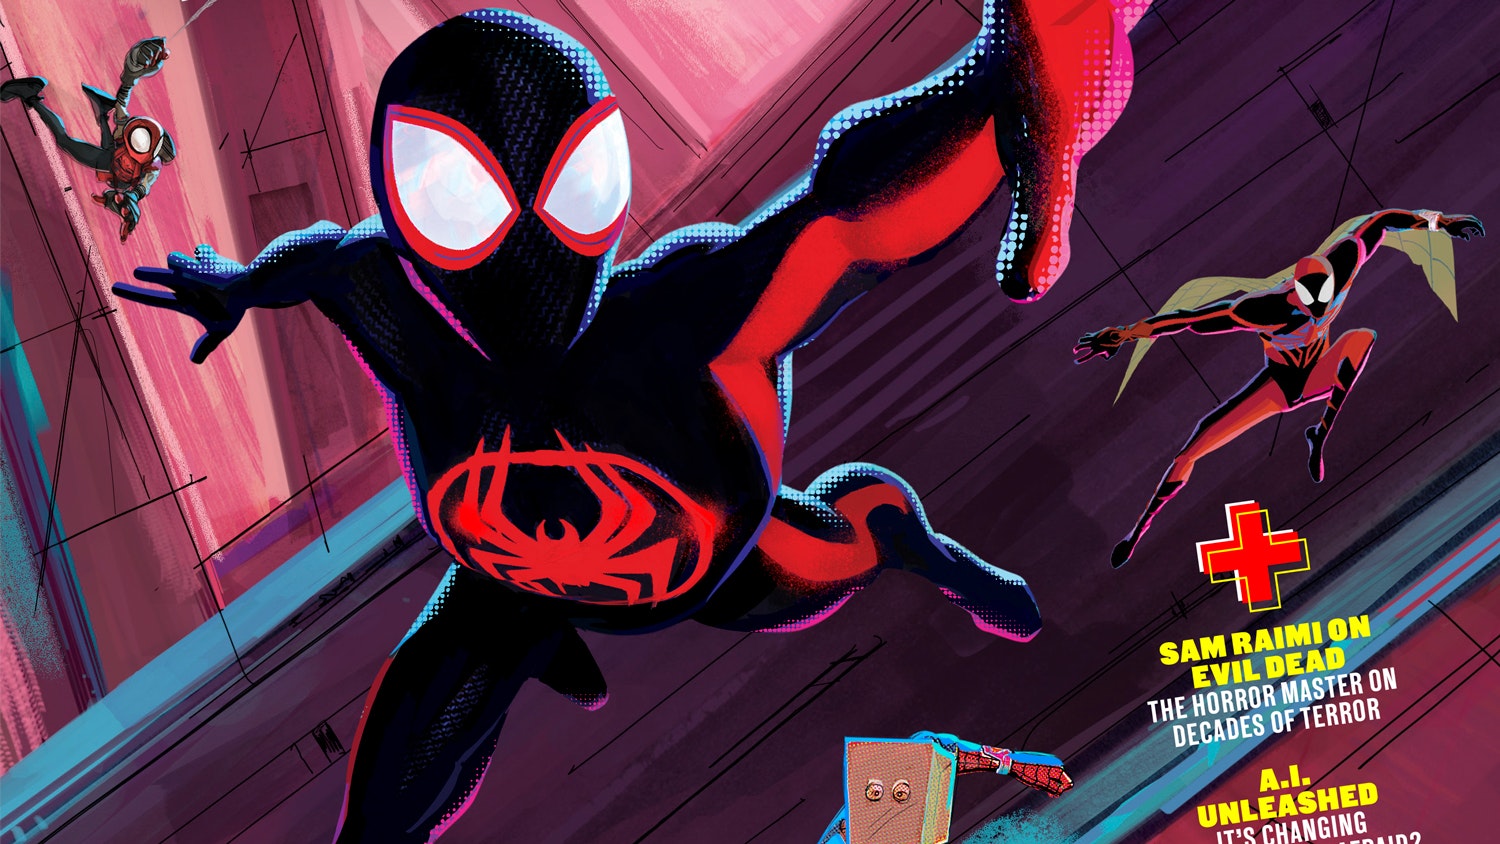 Spider-Man: Into the Spider-Verse' Reveals the Hero's Future